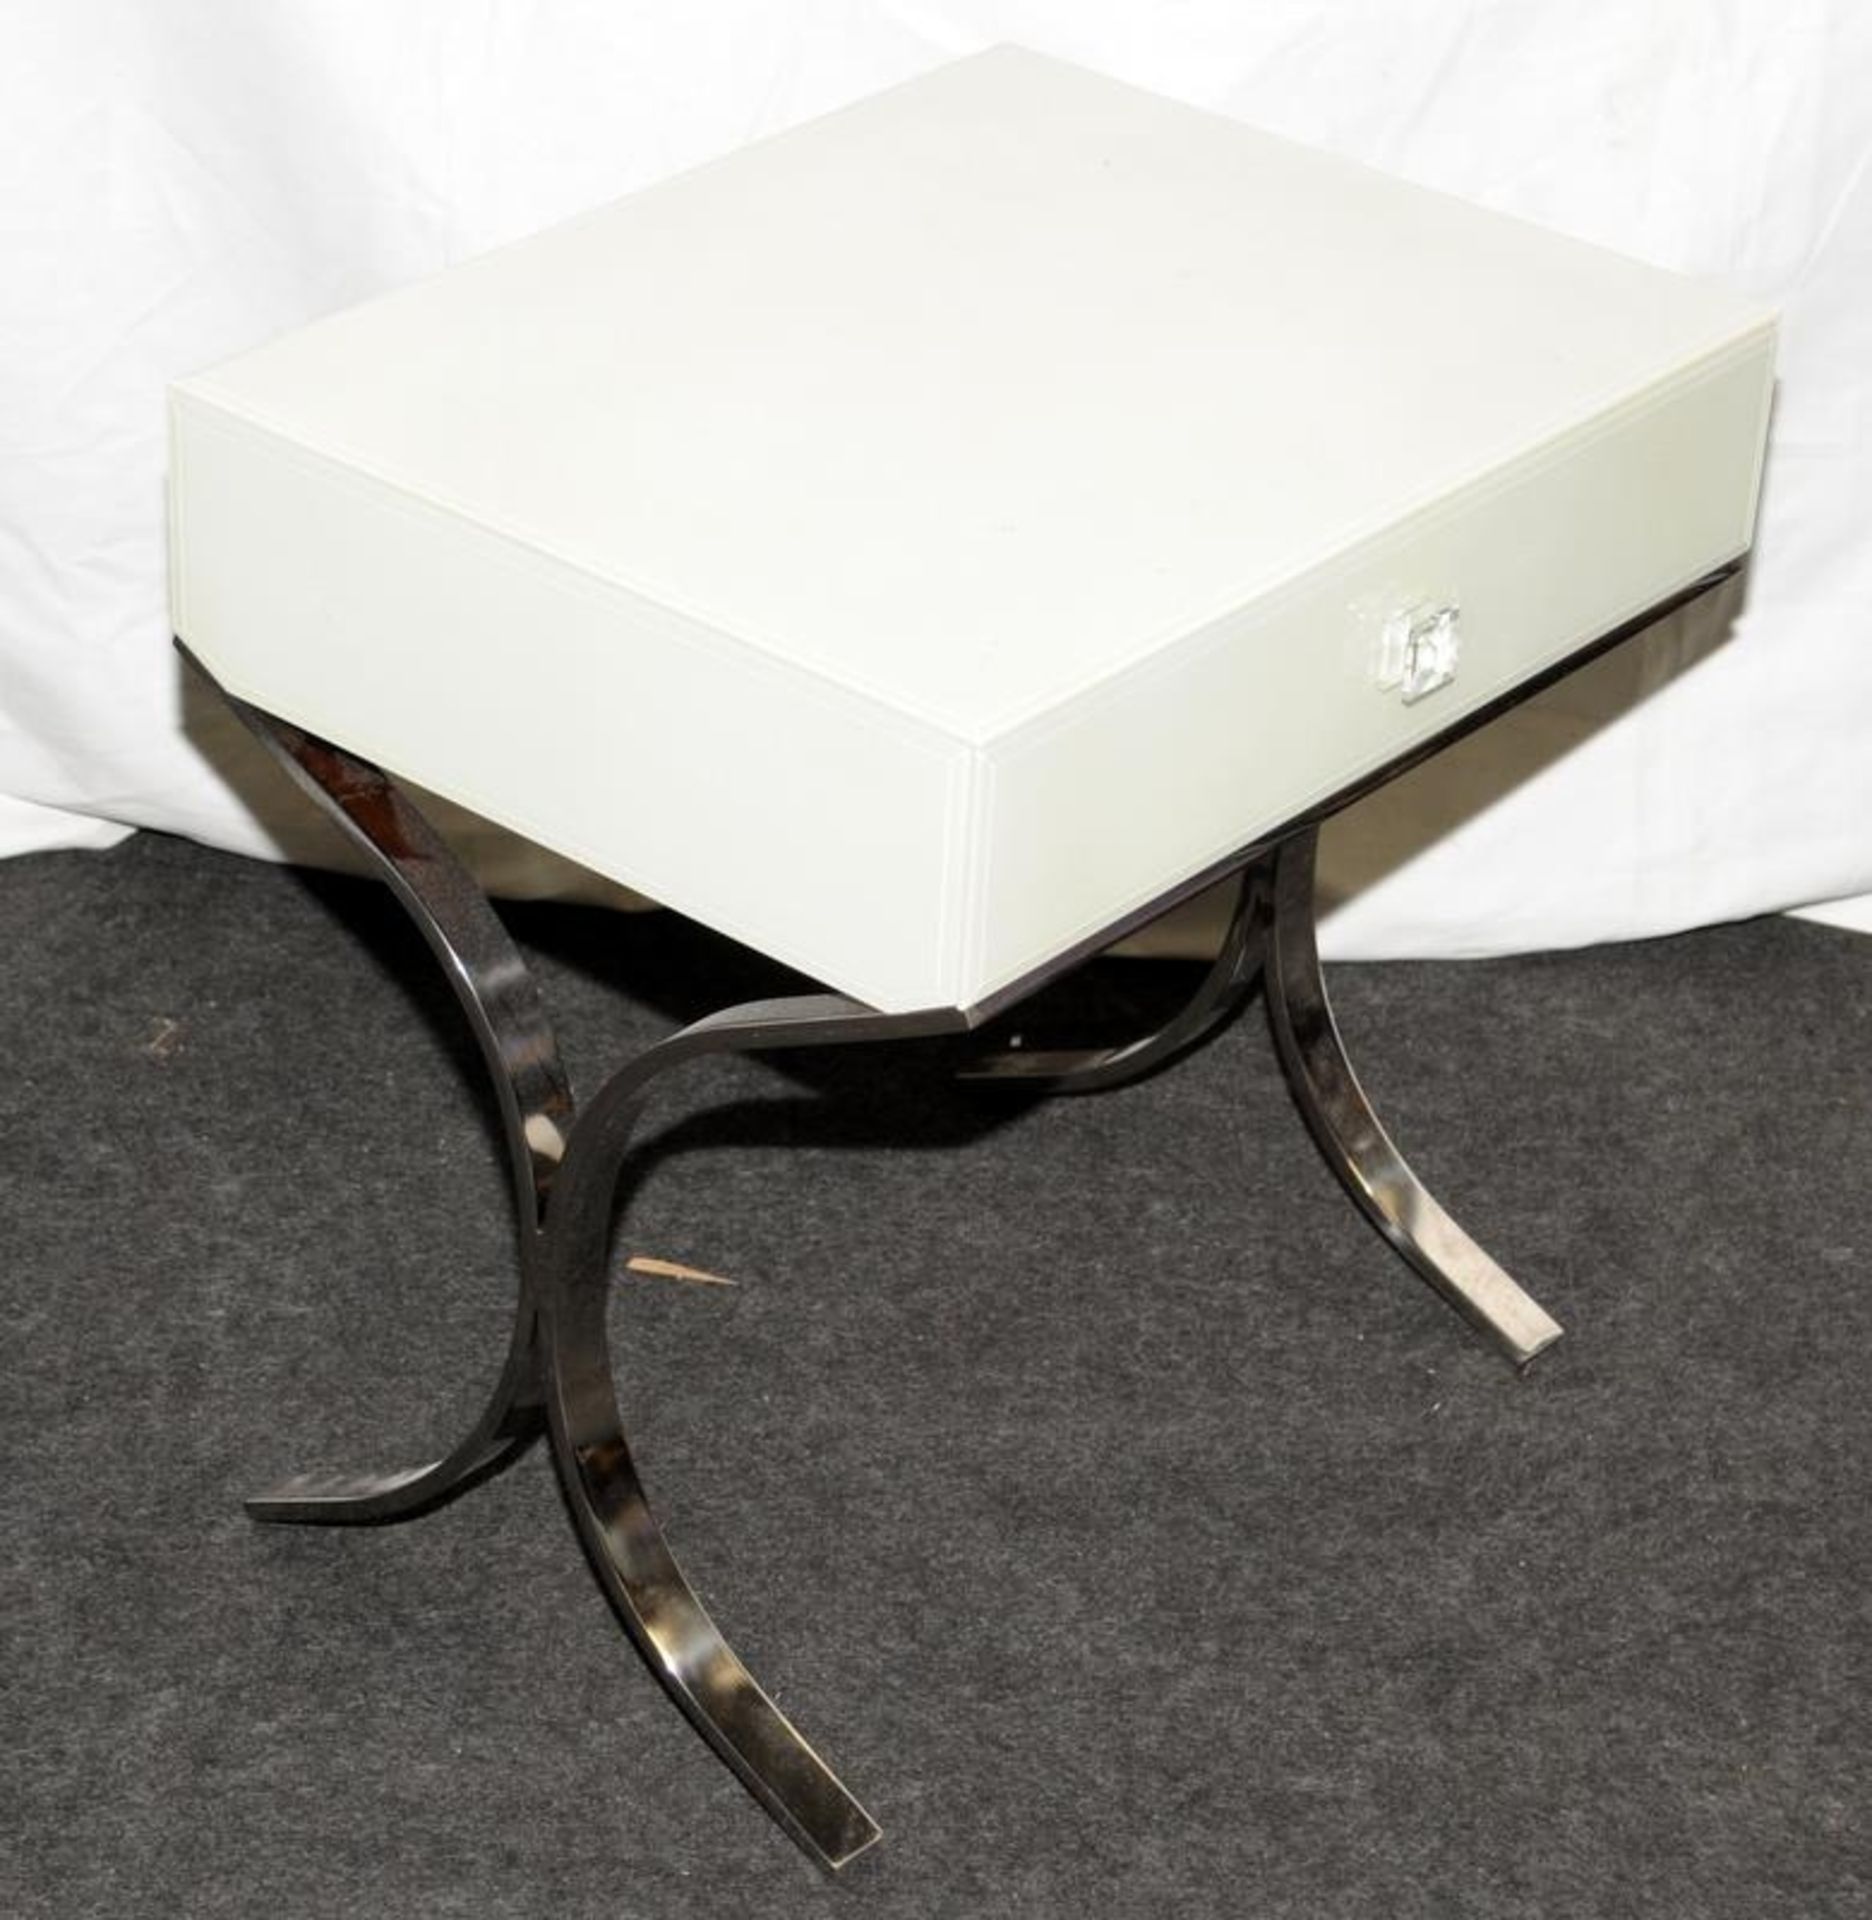 Lagoon Designer bed side table chrome and glass 52x52x40cm - Image 2 of 3